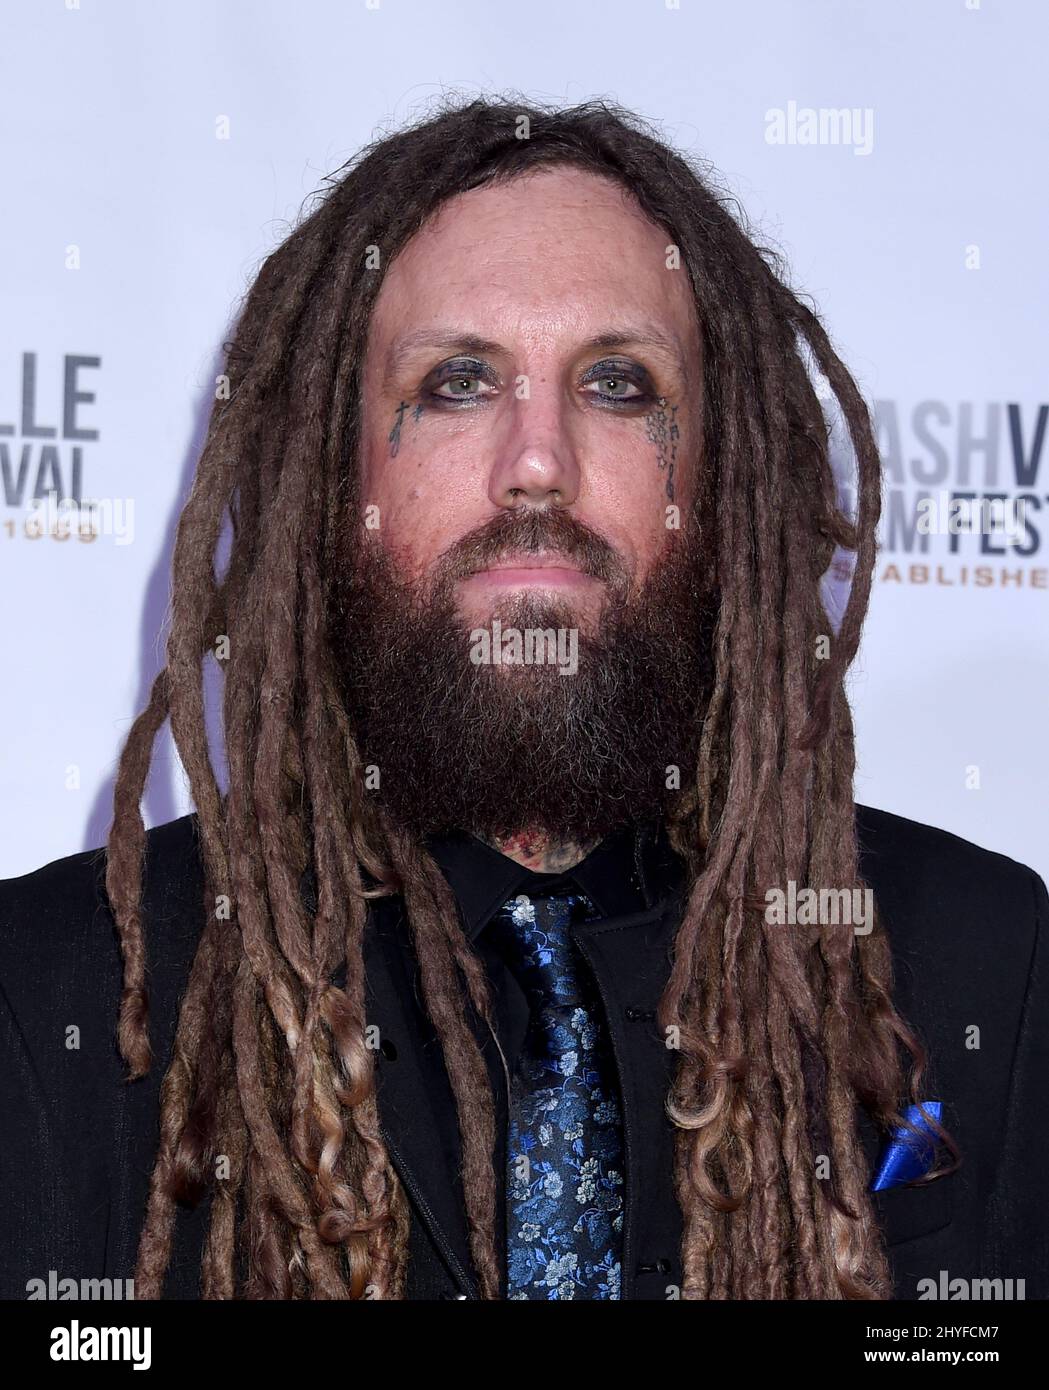 Brian Welch of the band Korn attend the screening of 'Loud Krazy Love' during the Nashville Film Festival held at the Regal 27 Hollywood Theatre on May 11, 2018 in Nashville, Tennessee Stock Photo